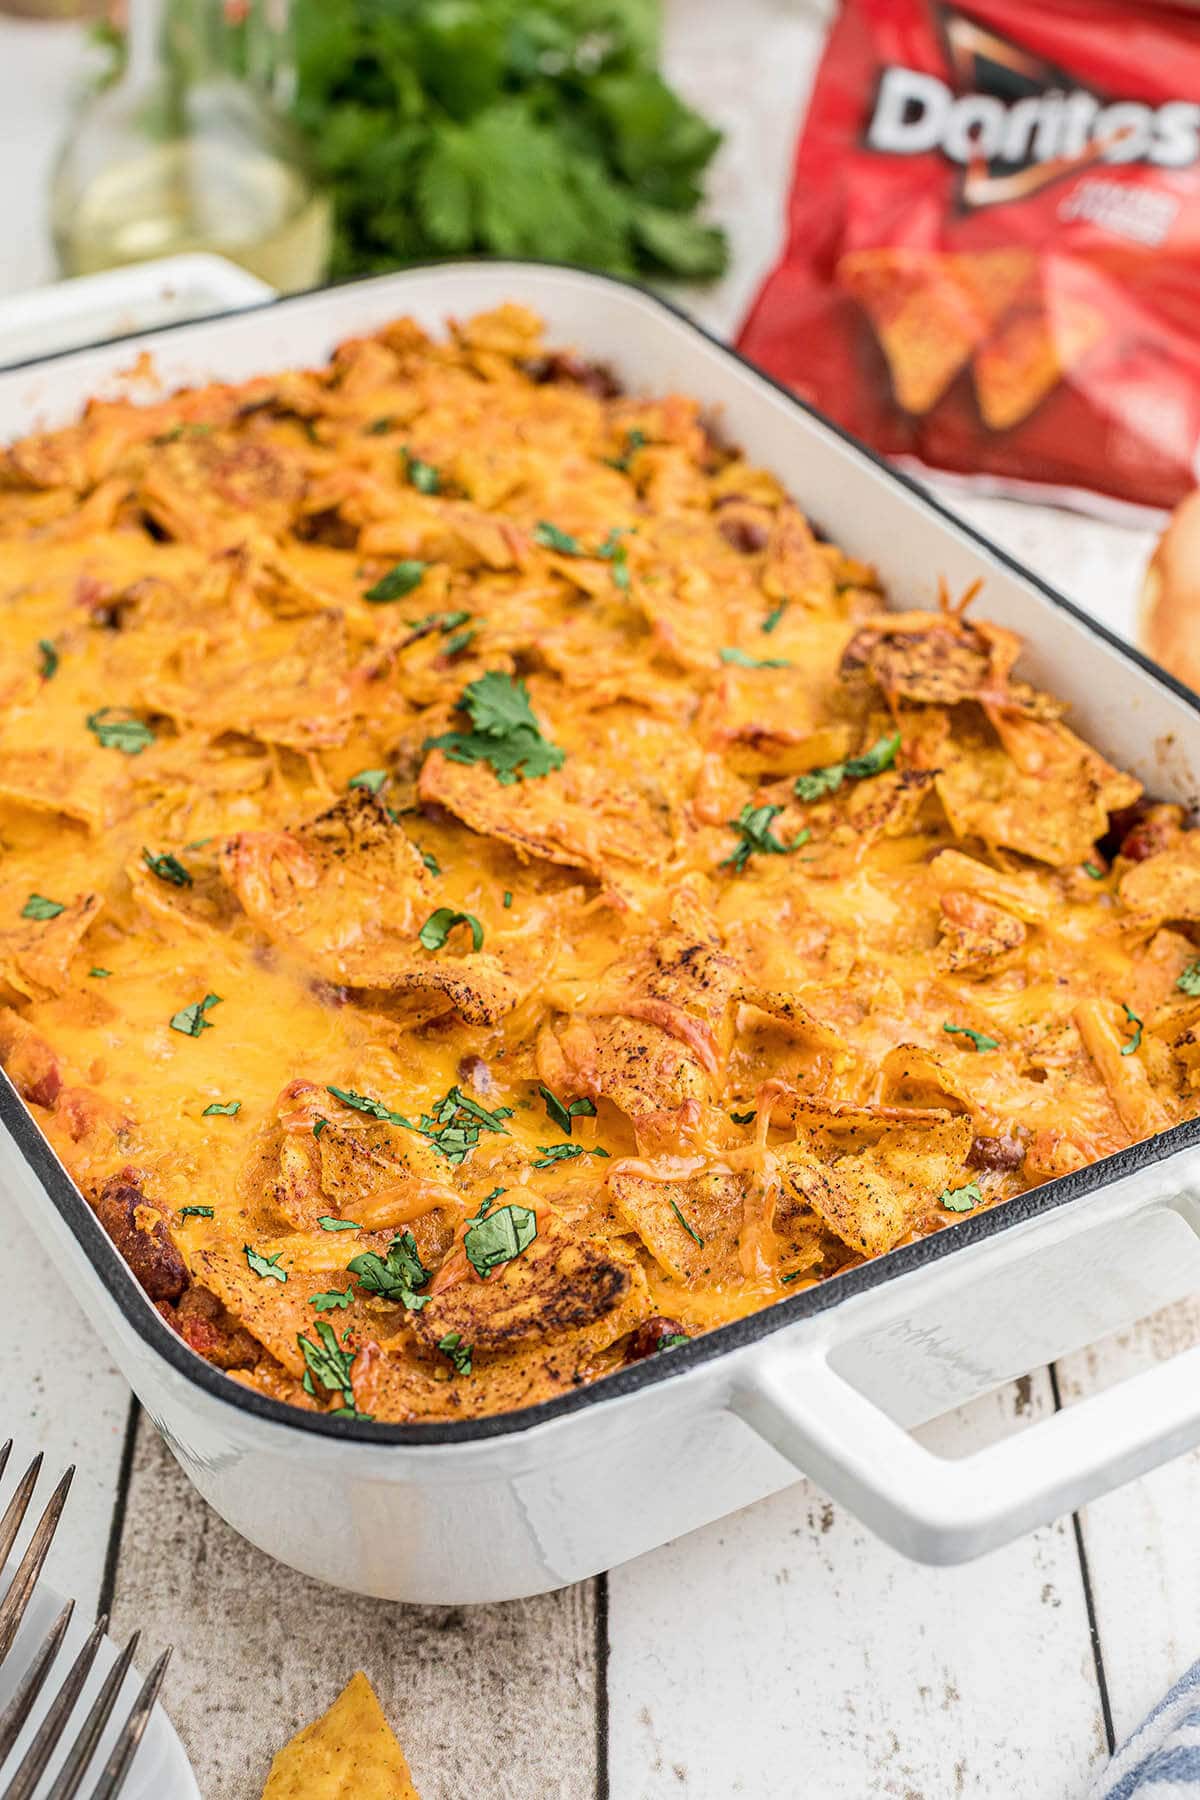 Cheesy casserole in baking dish topped with cilantro.